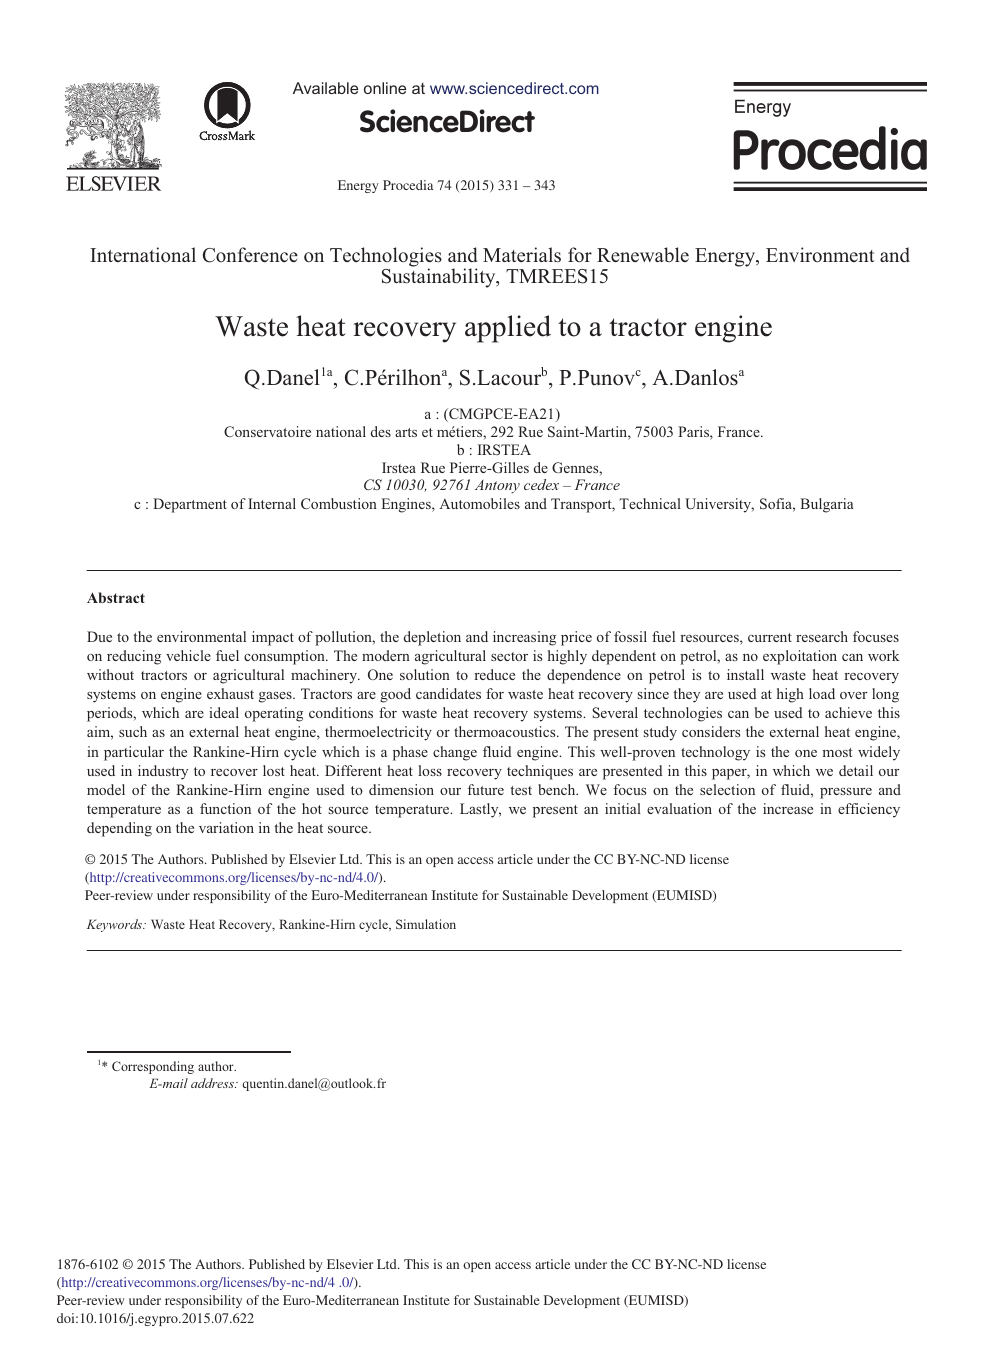 Waste Heat Recovery Applied To A Tractor Engine Topic Of Research Paper In Materials Engineering Download Scholarly Article Pdf And Read For Free On Cyberleninka Open Science Hub